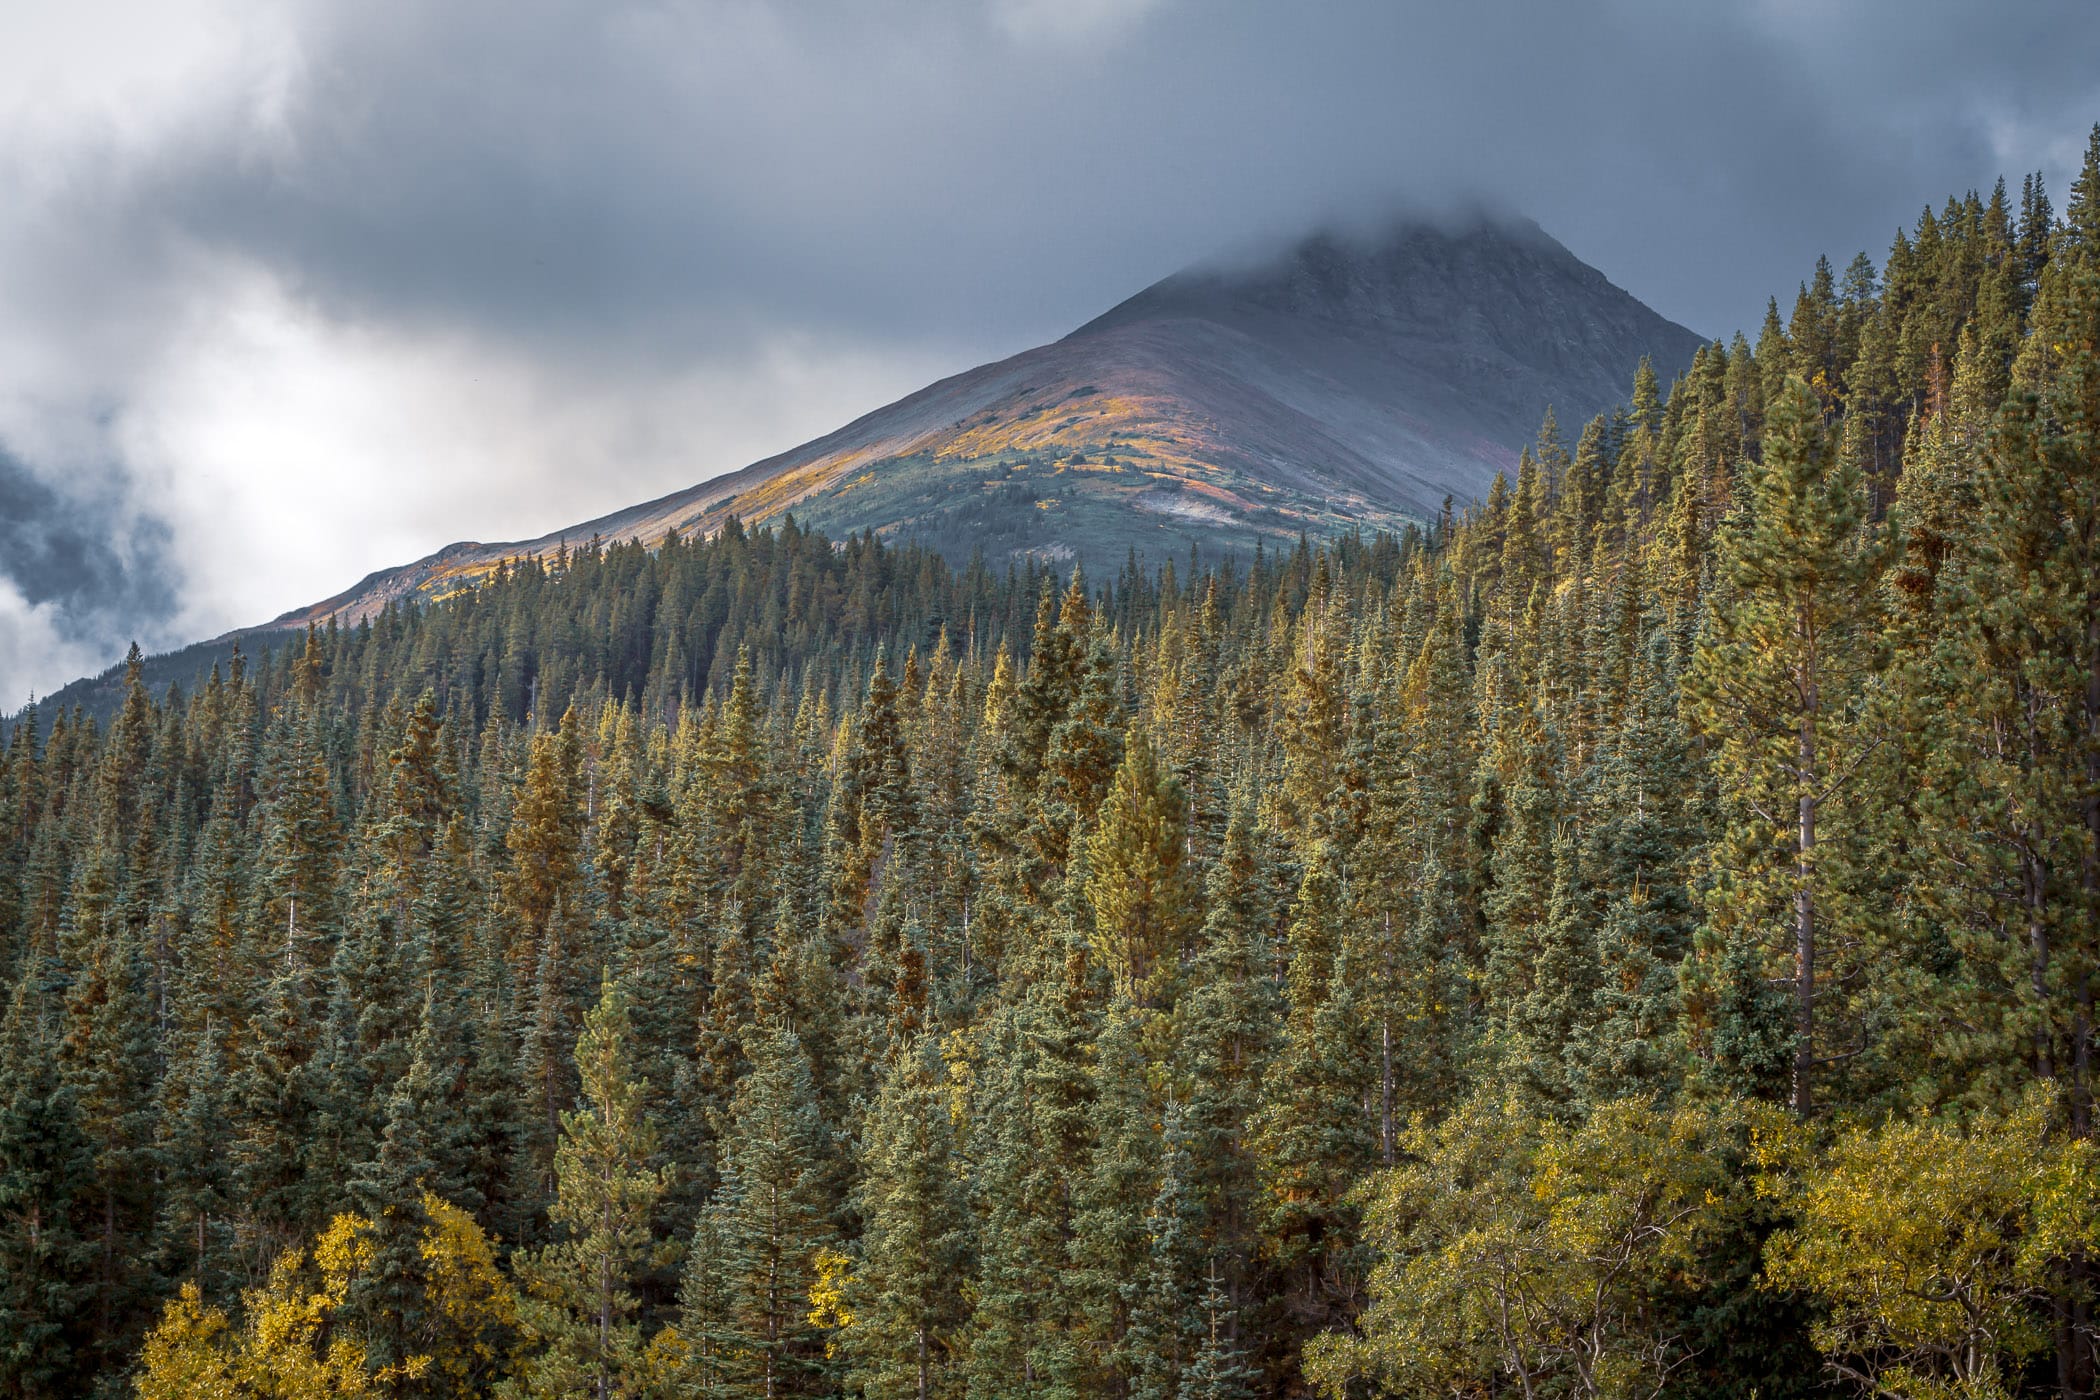 Low clouds roll over a mountain near the shore of Tutshi Lake in British Columbia's Stikine Region.